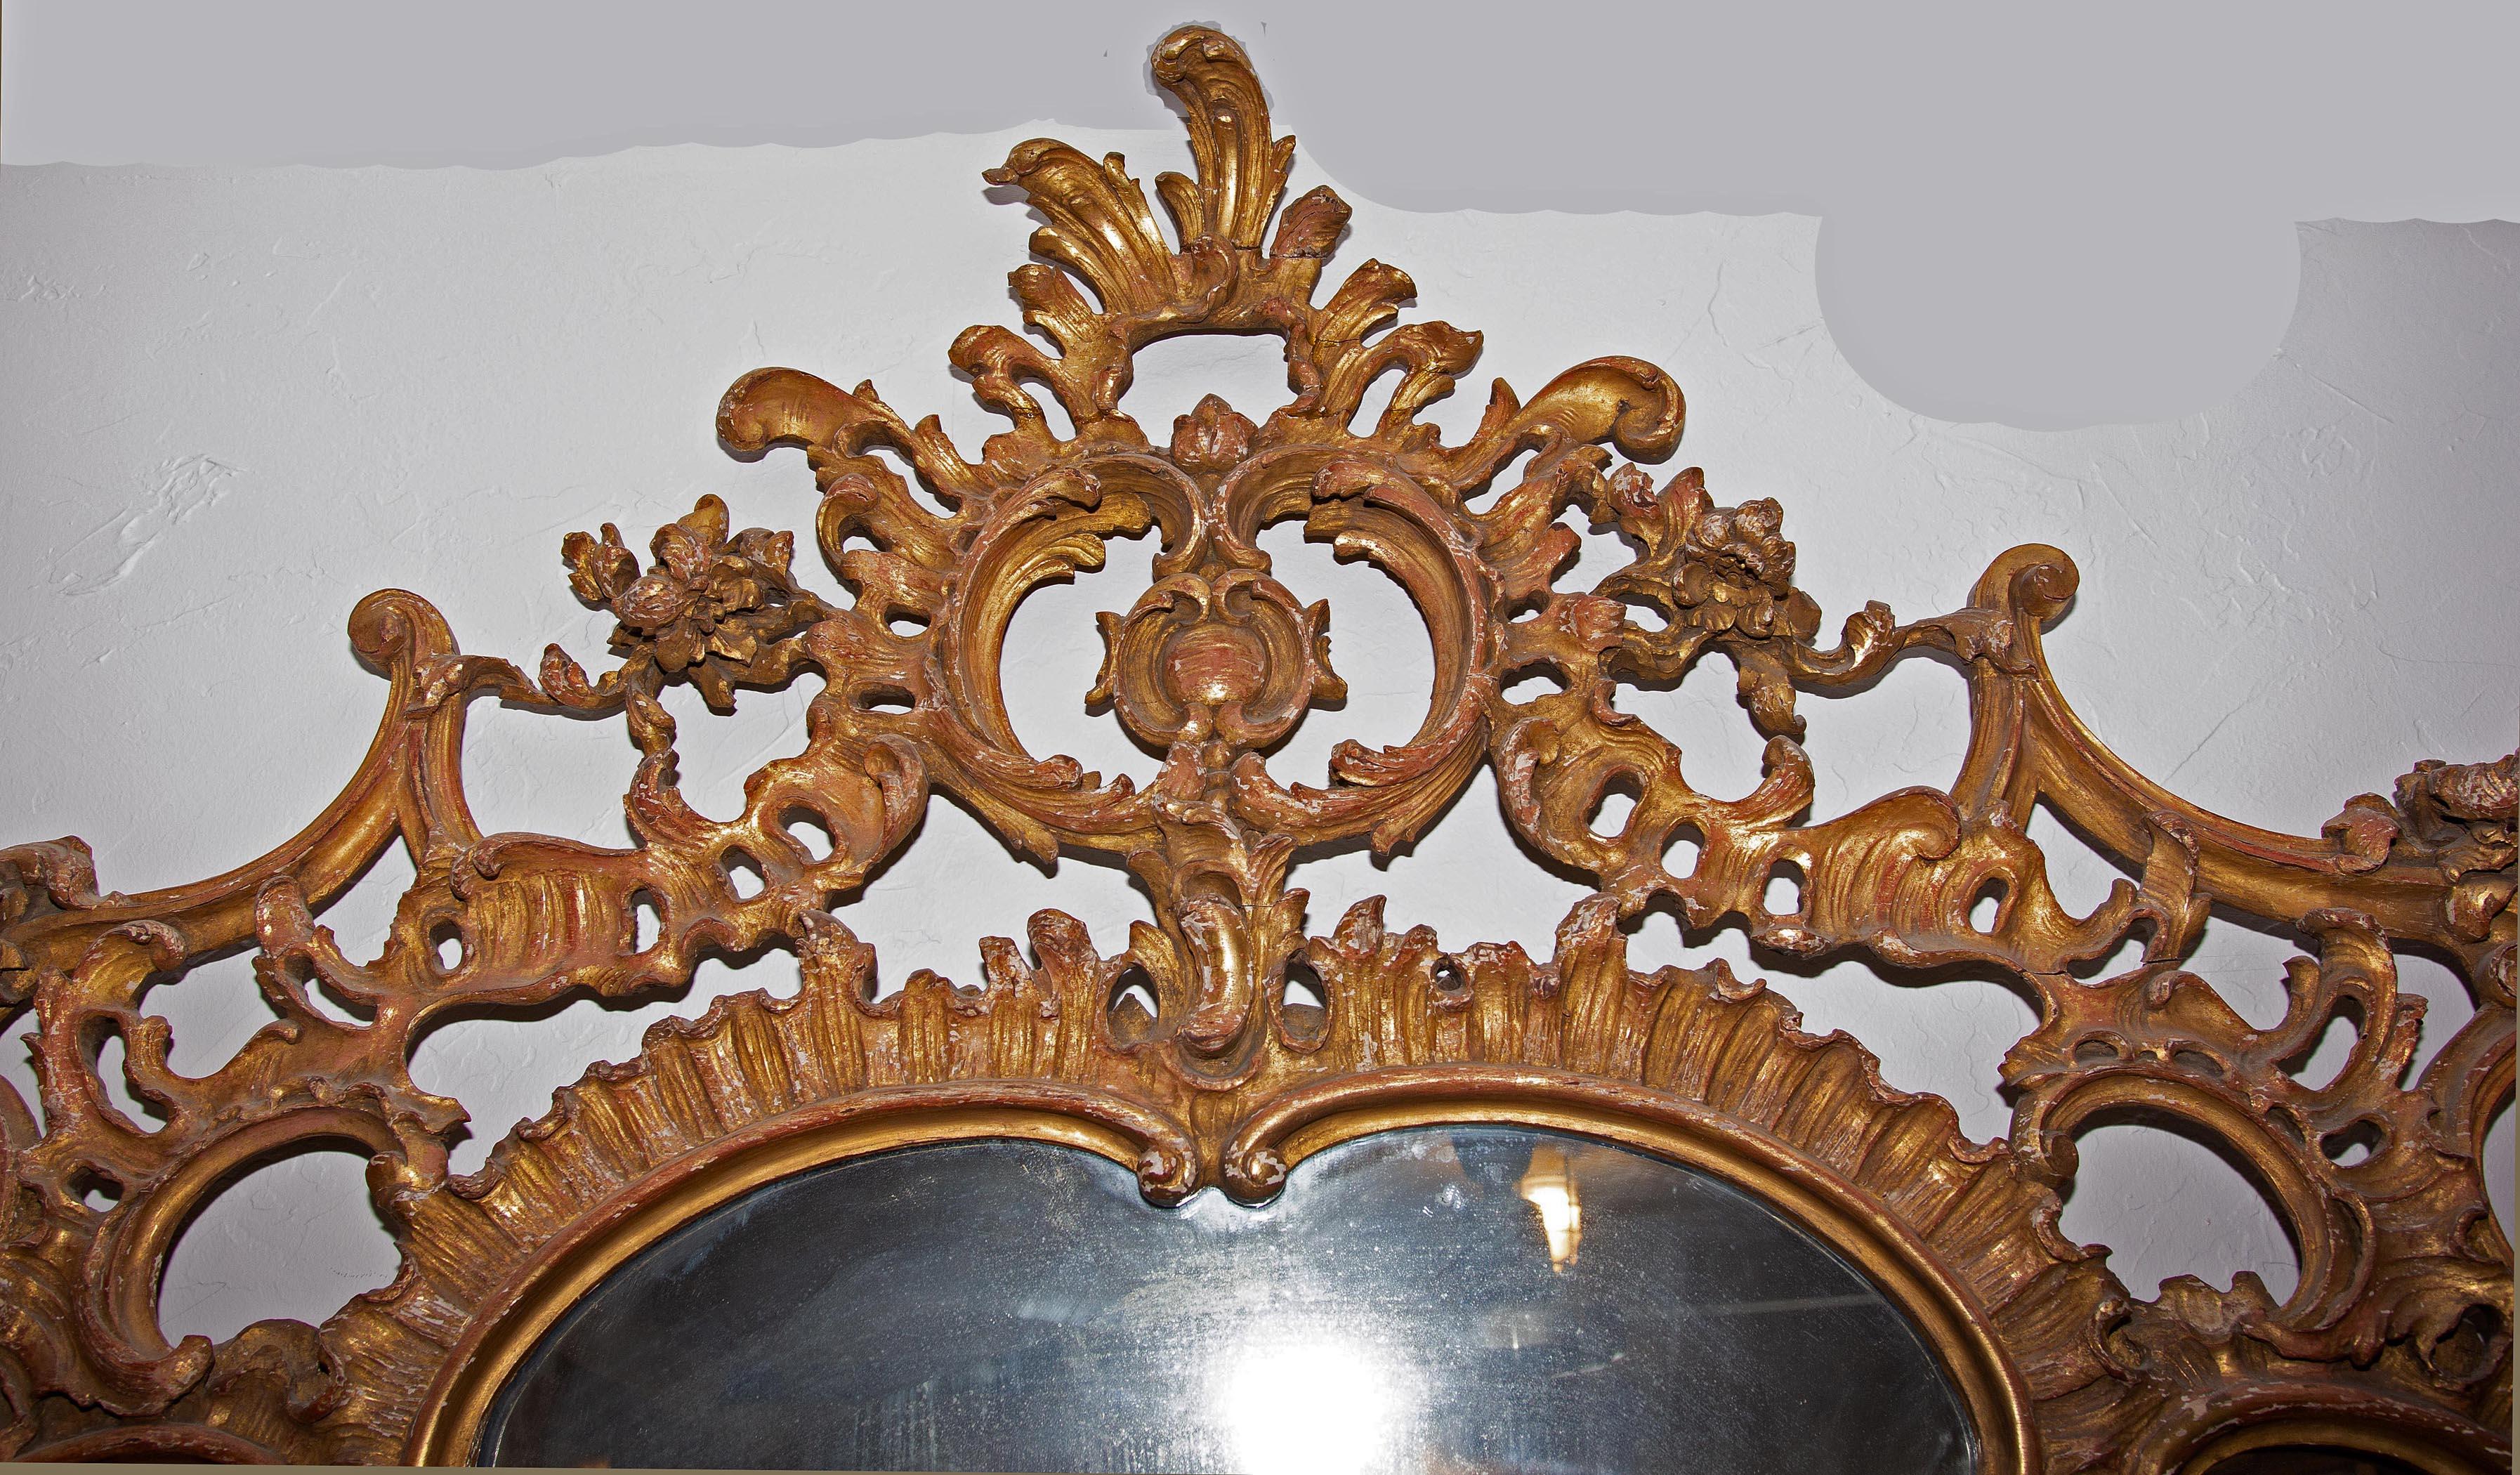 Large antique continental carved and gold gilt over mantel (fireplace) mirror, 19th century. Measures: 60